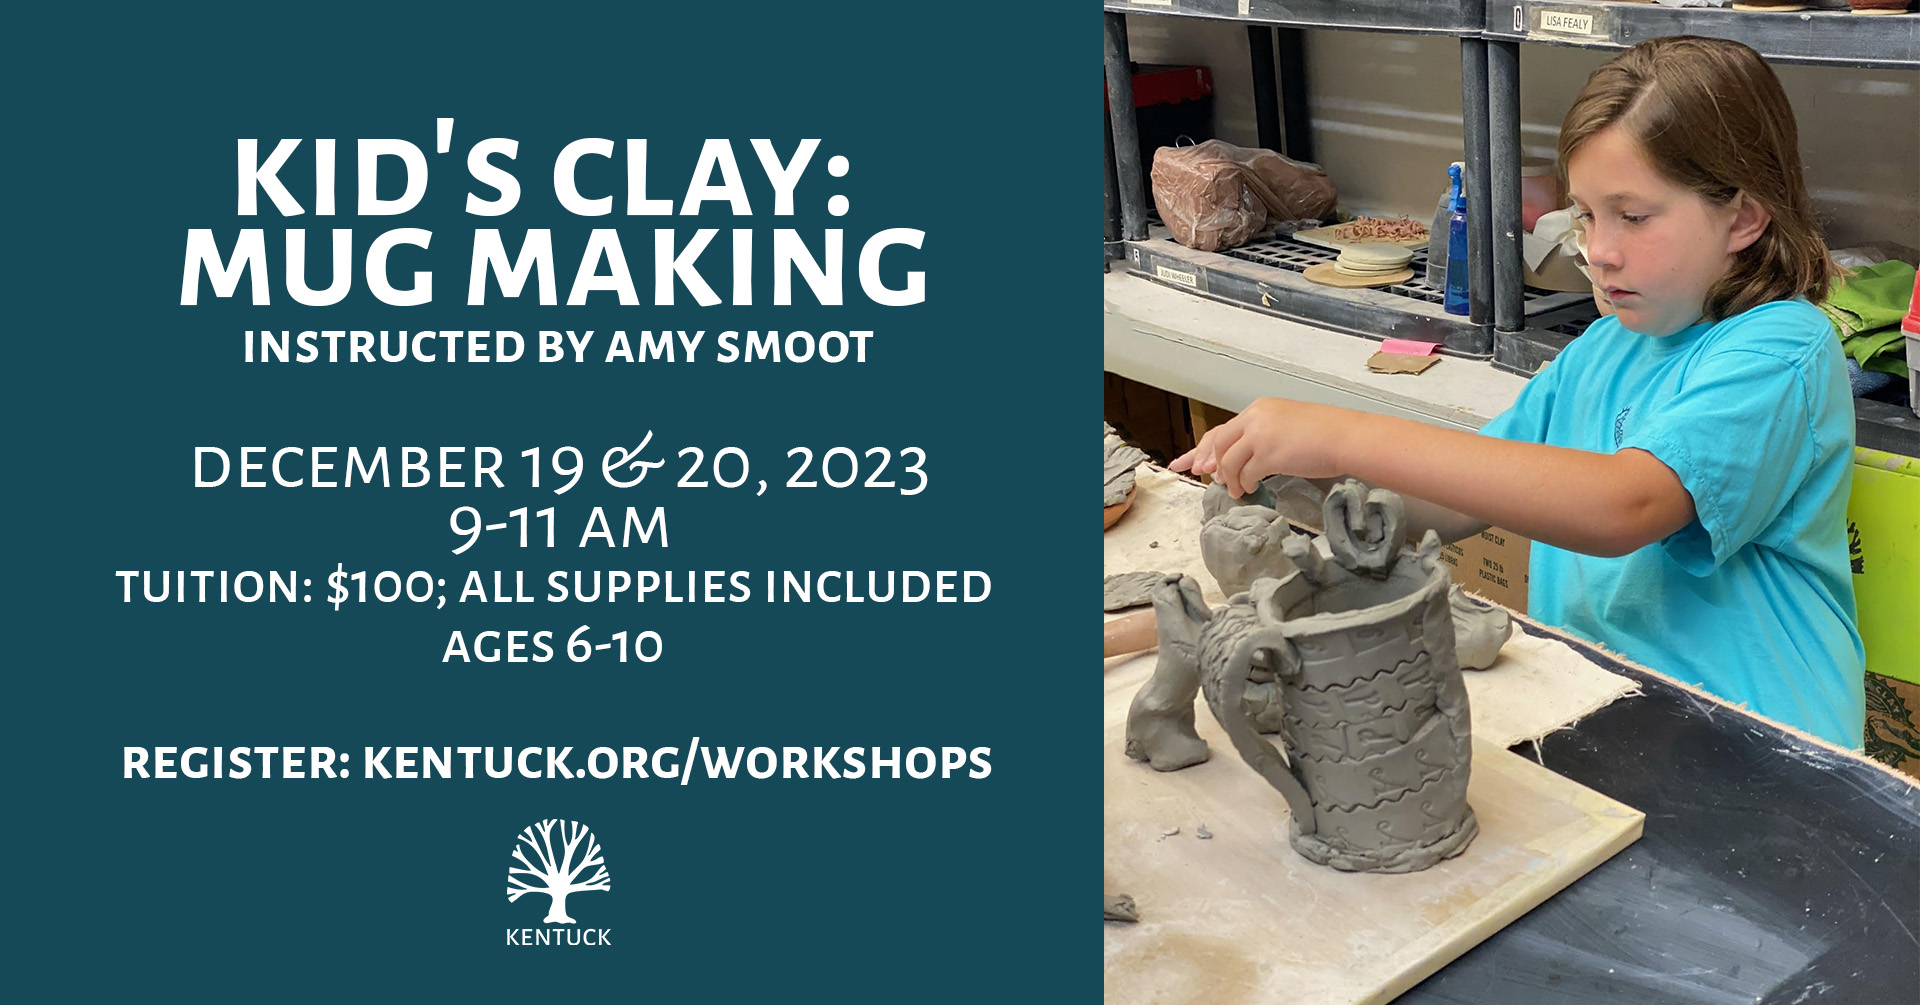 Kid's Clay Mug Making with Amy Smoot: December 2023 cover image